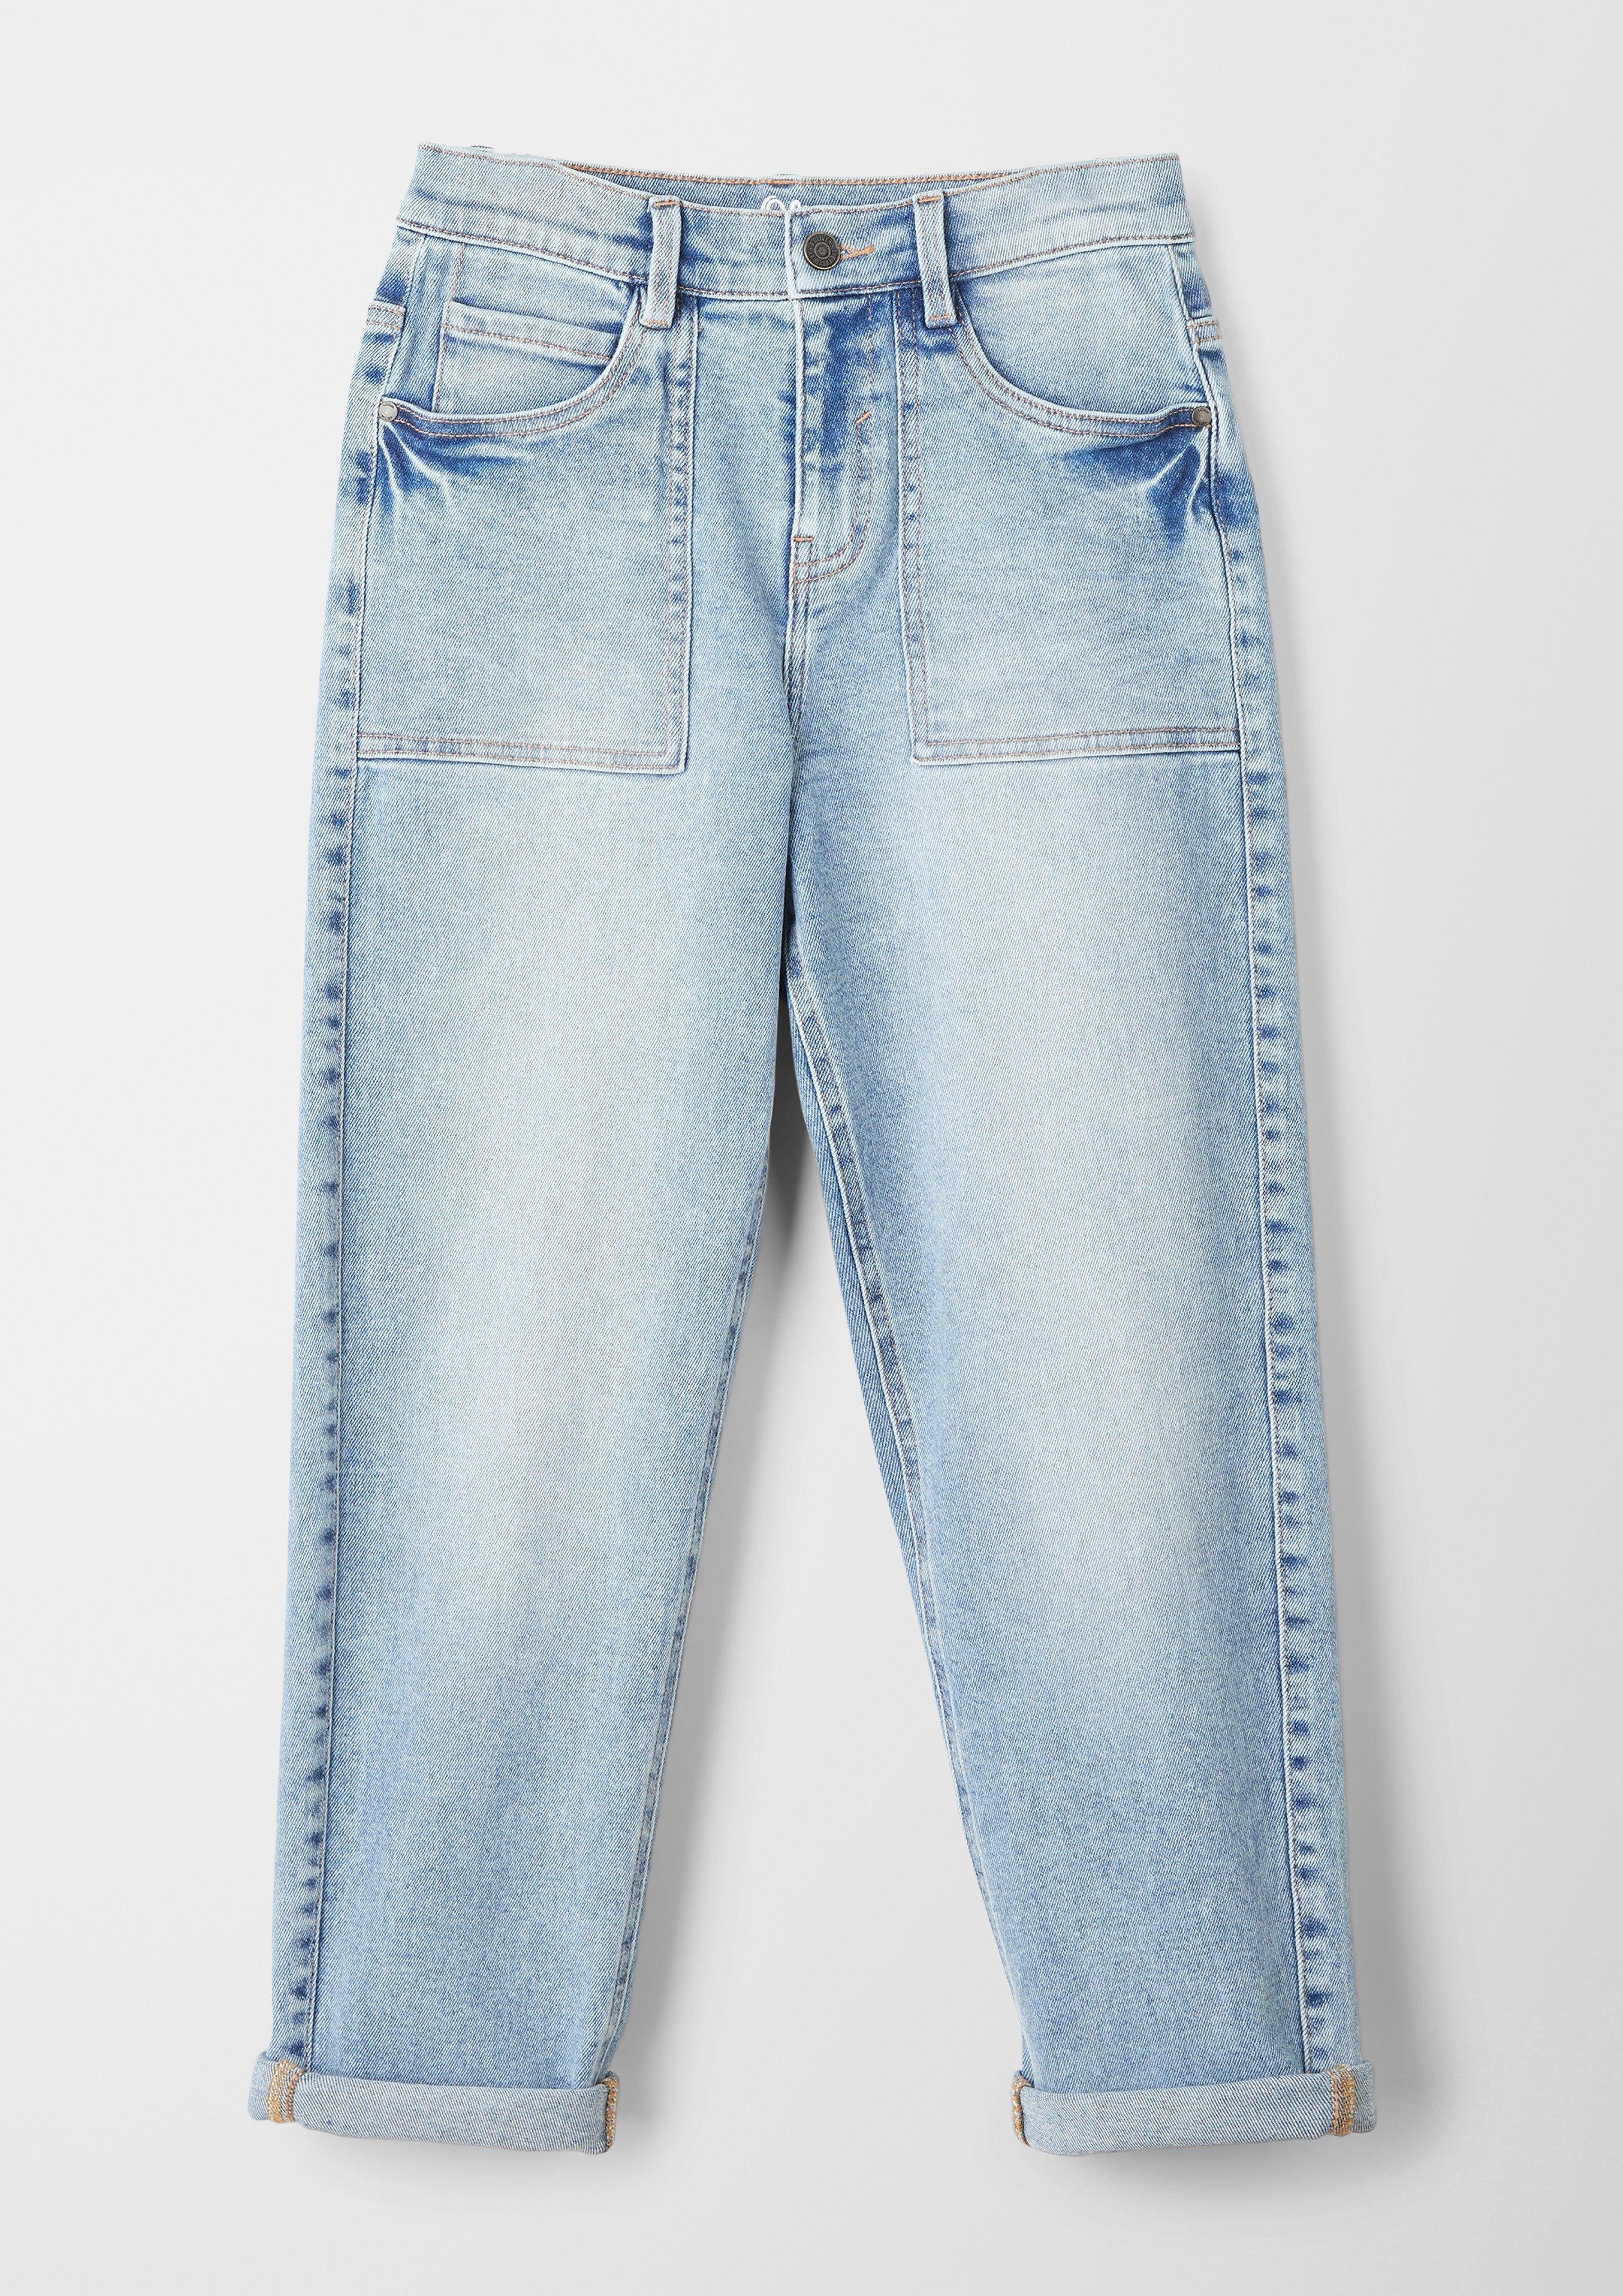 ungeheuerlich s.Oliver 5-Pocket-Jeans Jeans Leg Tapered / / / Waschung Relaxed Rise Mid Fit